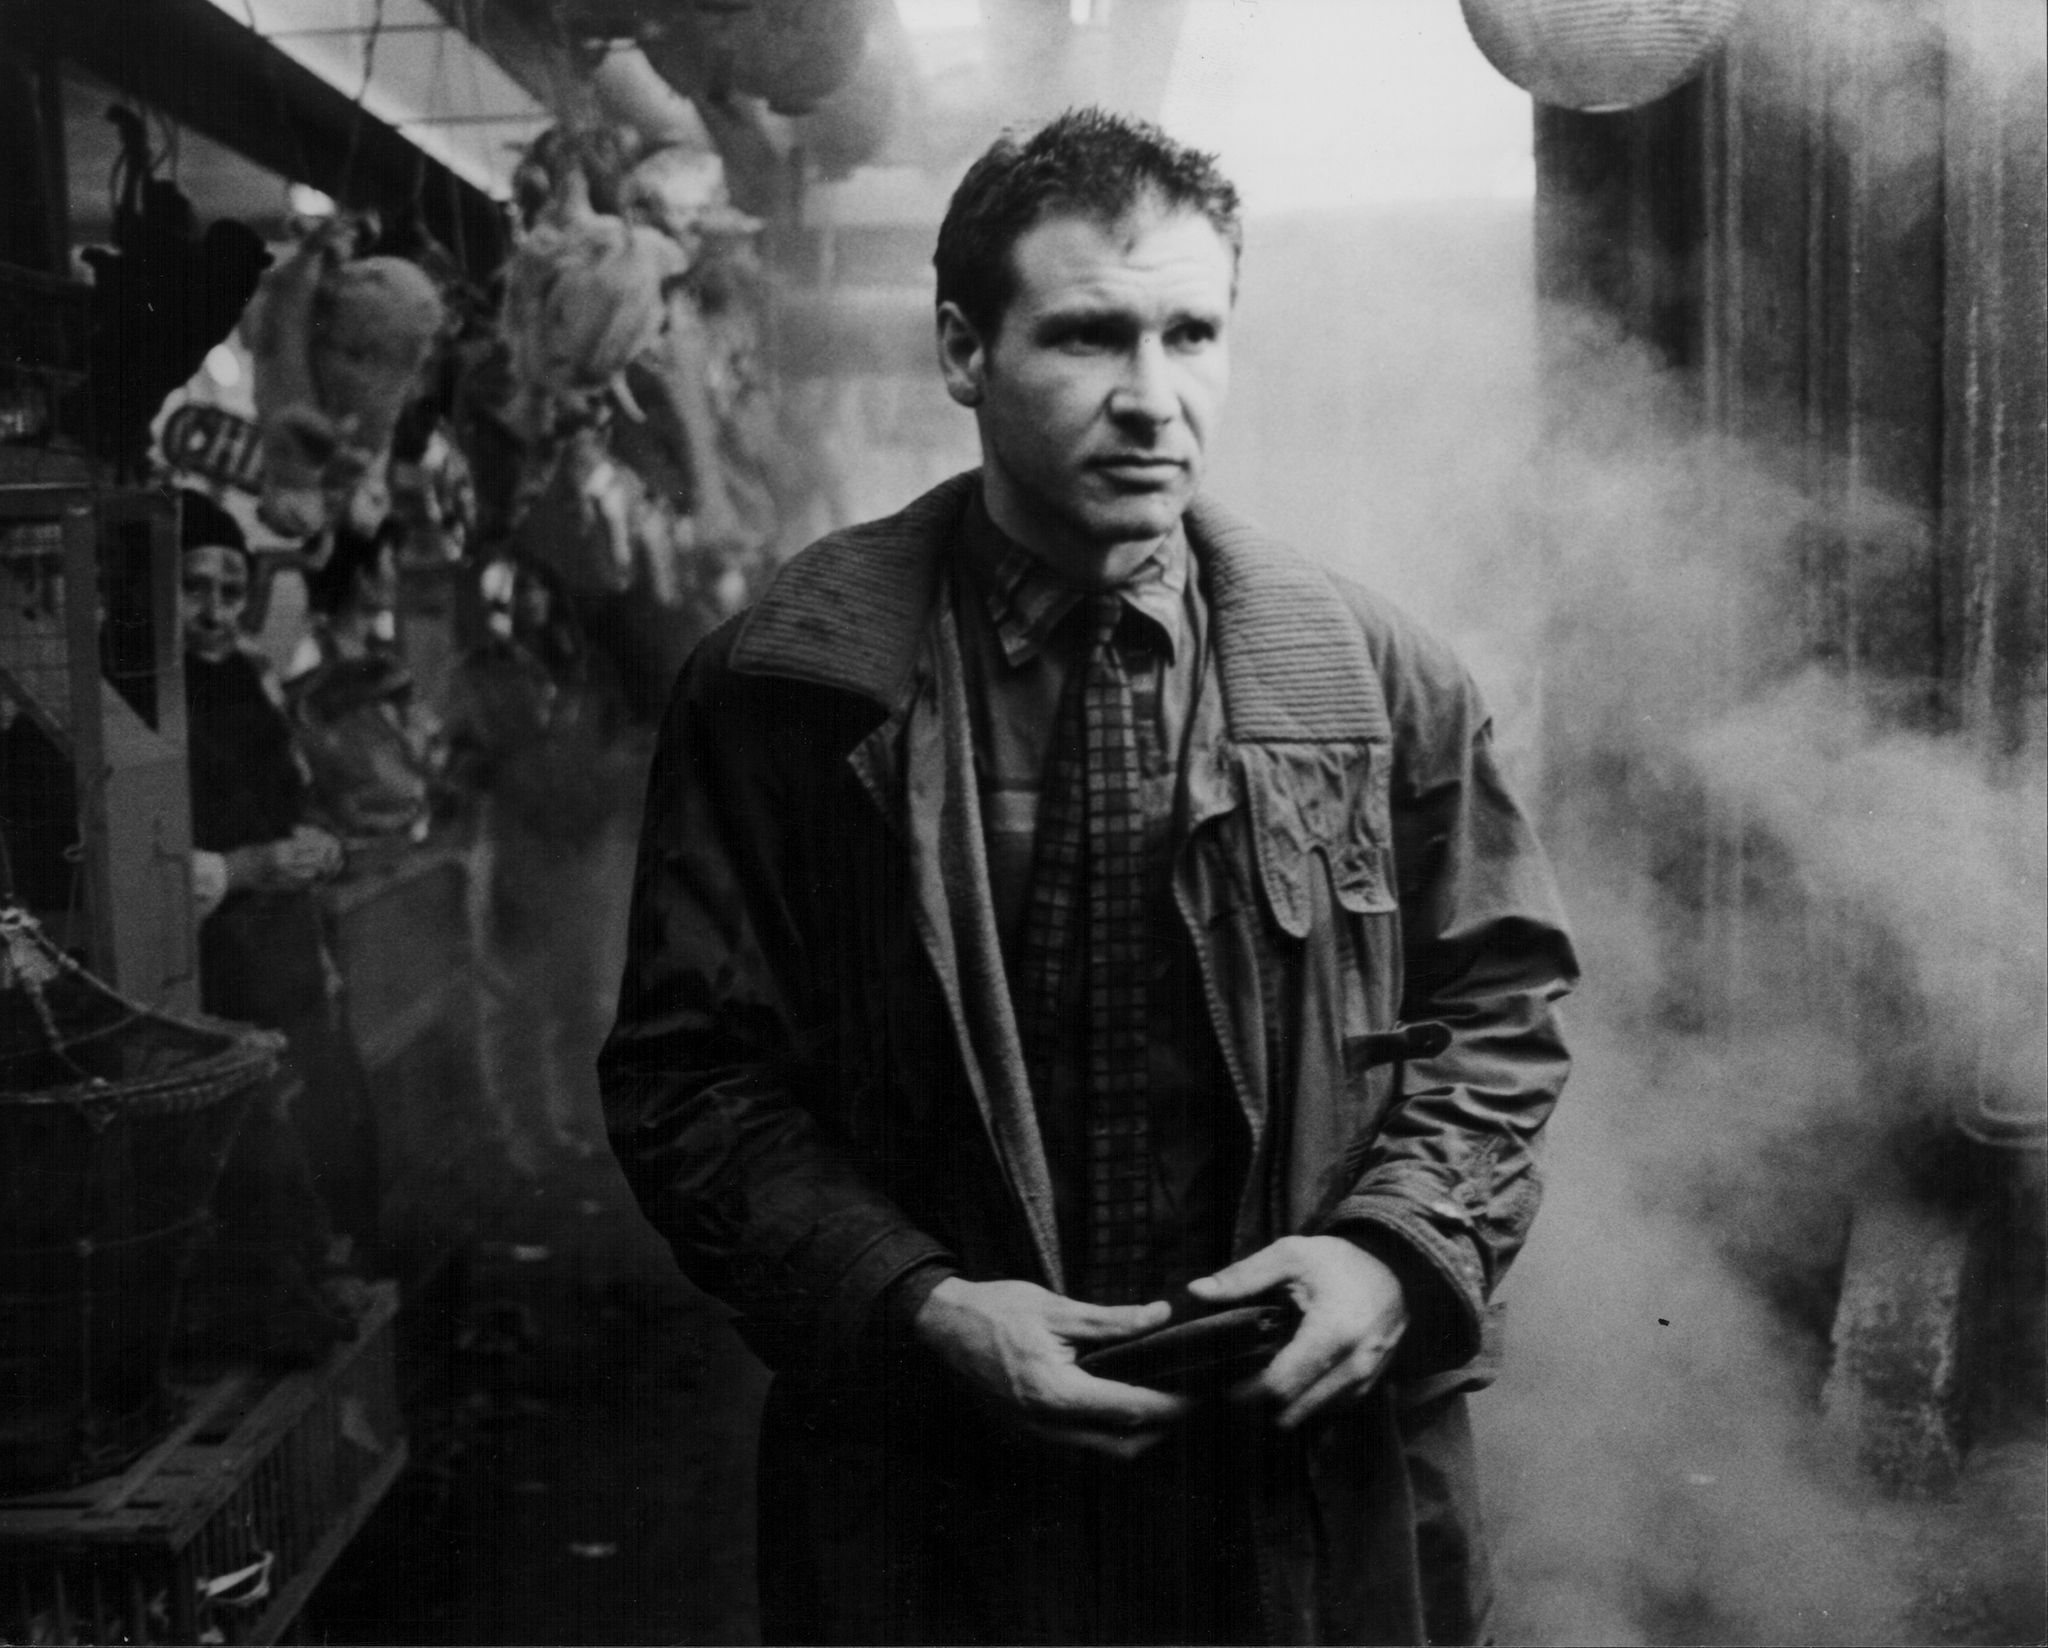 actor harrison ford in a scene from the movie 'blade runner', 1982 photo by stanley bielecki movie collectiongetty images